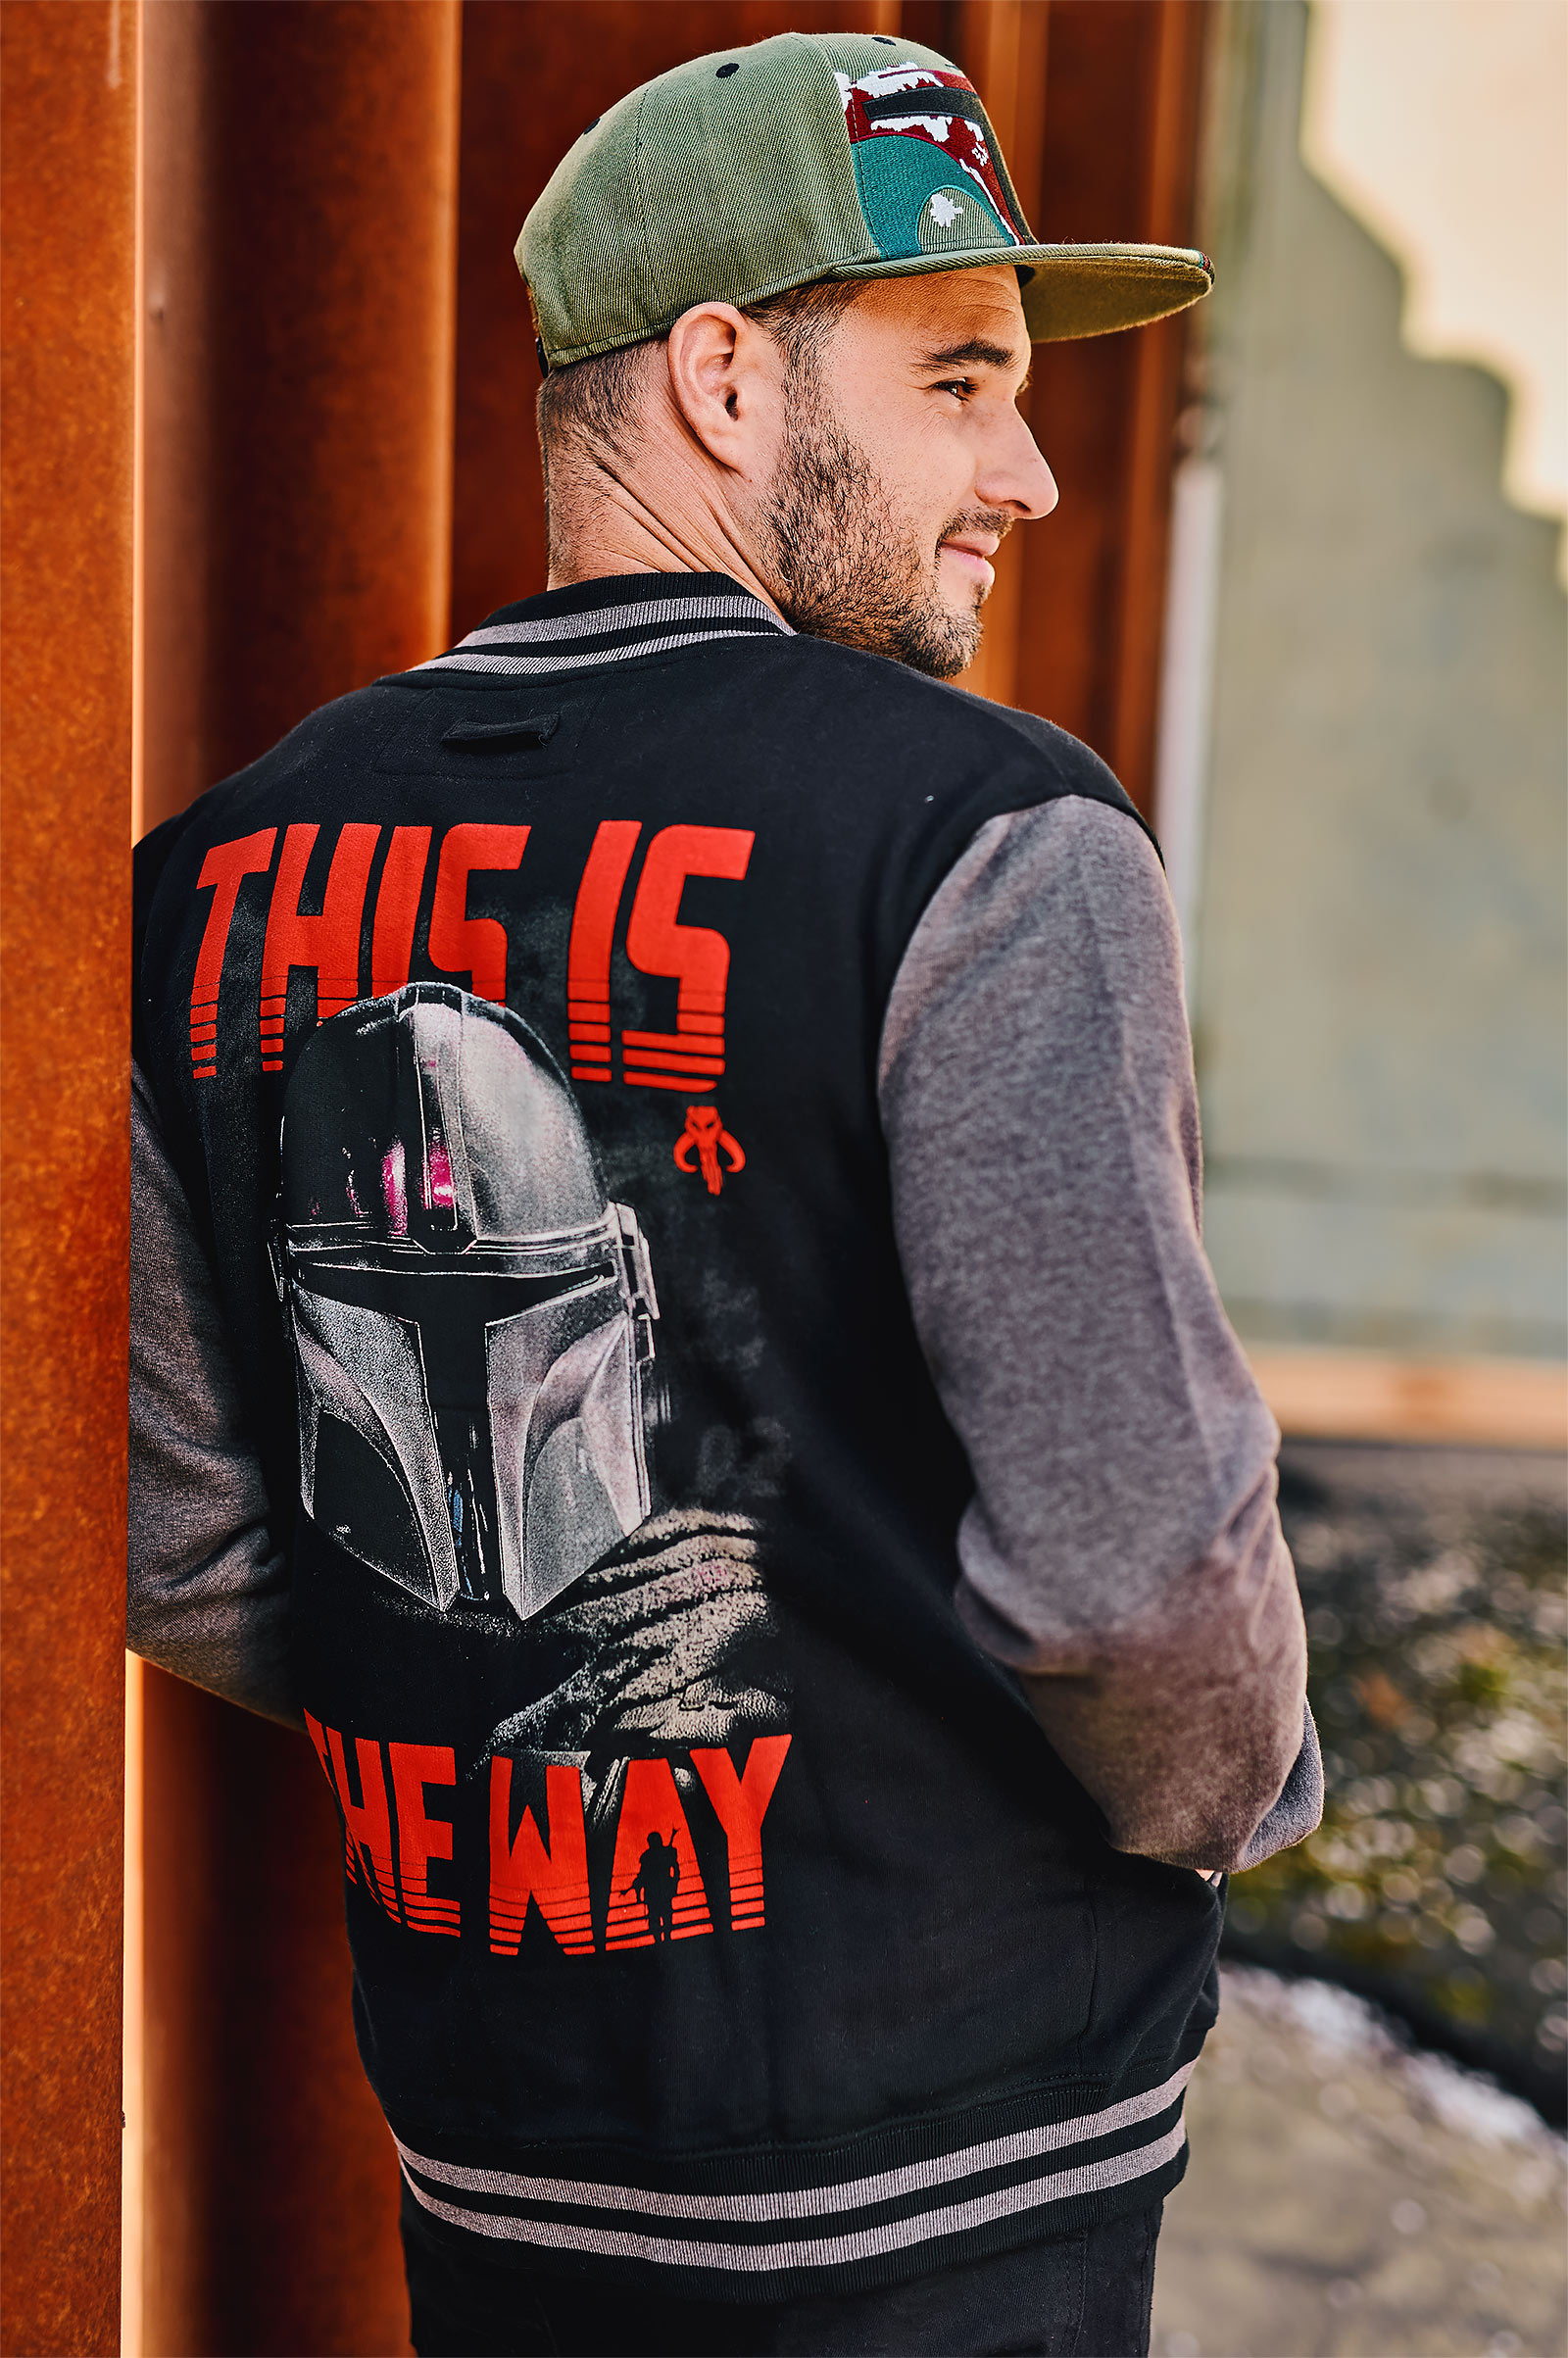 The Mandalorian This Is the Way College Jacke - Star Wars